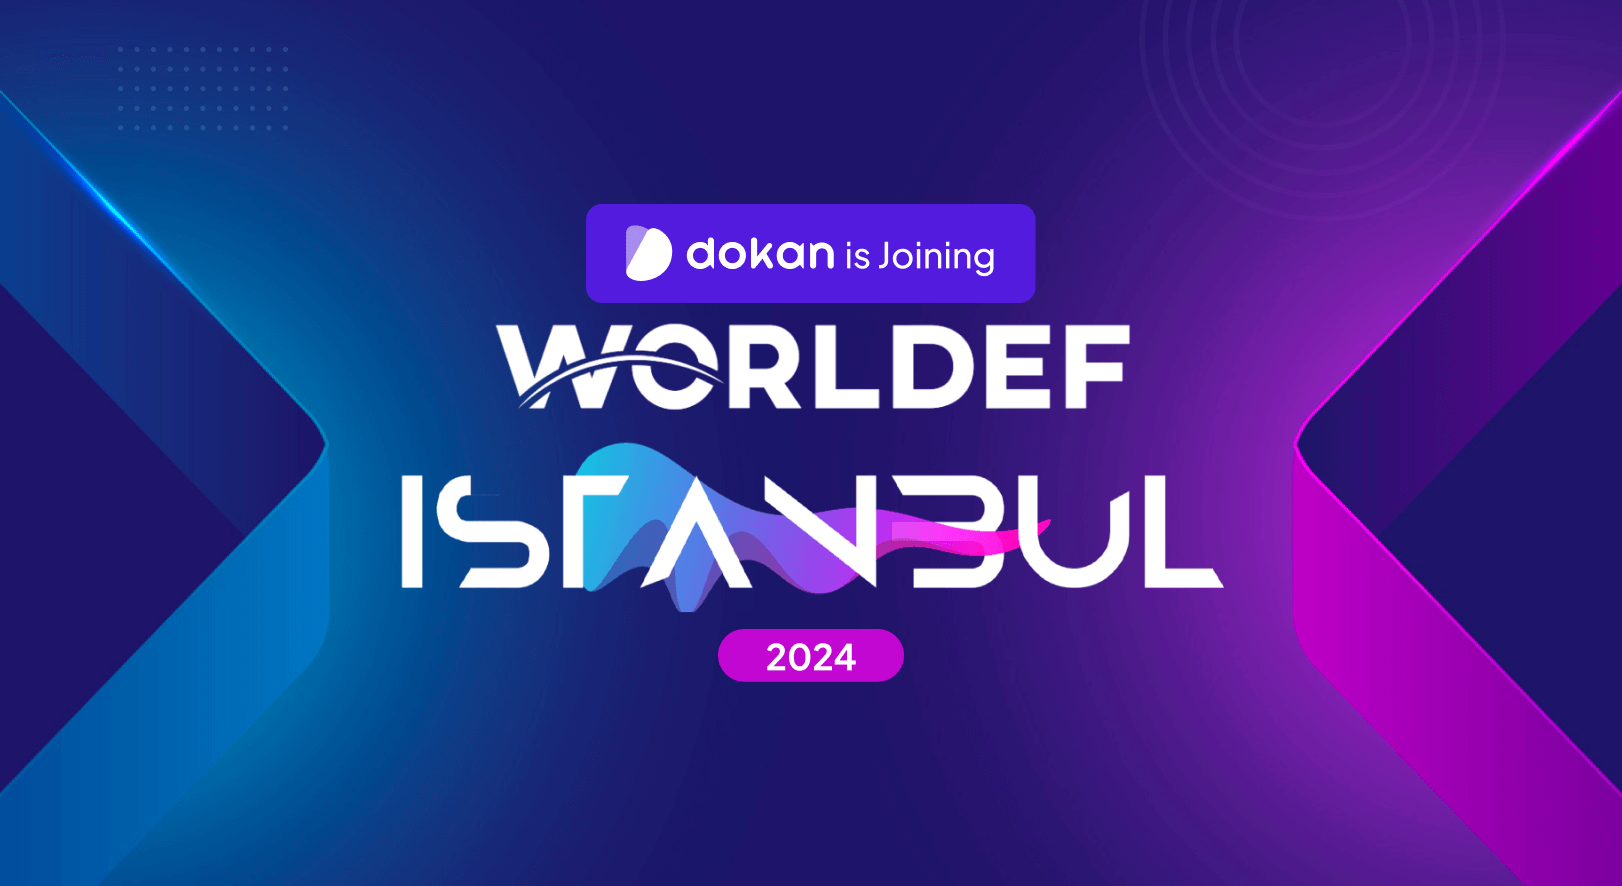 This is the feature image of Dokan is joining WORLDEF Istanbul 2024